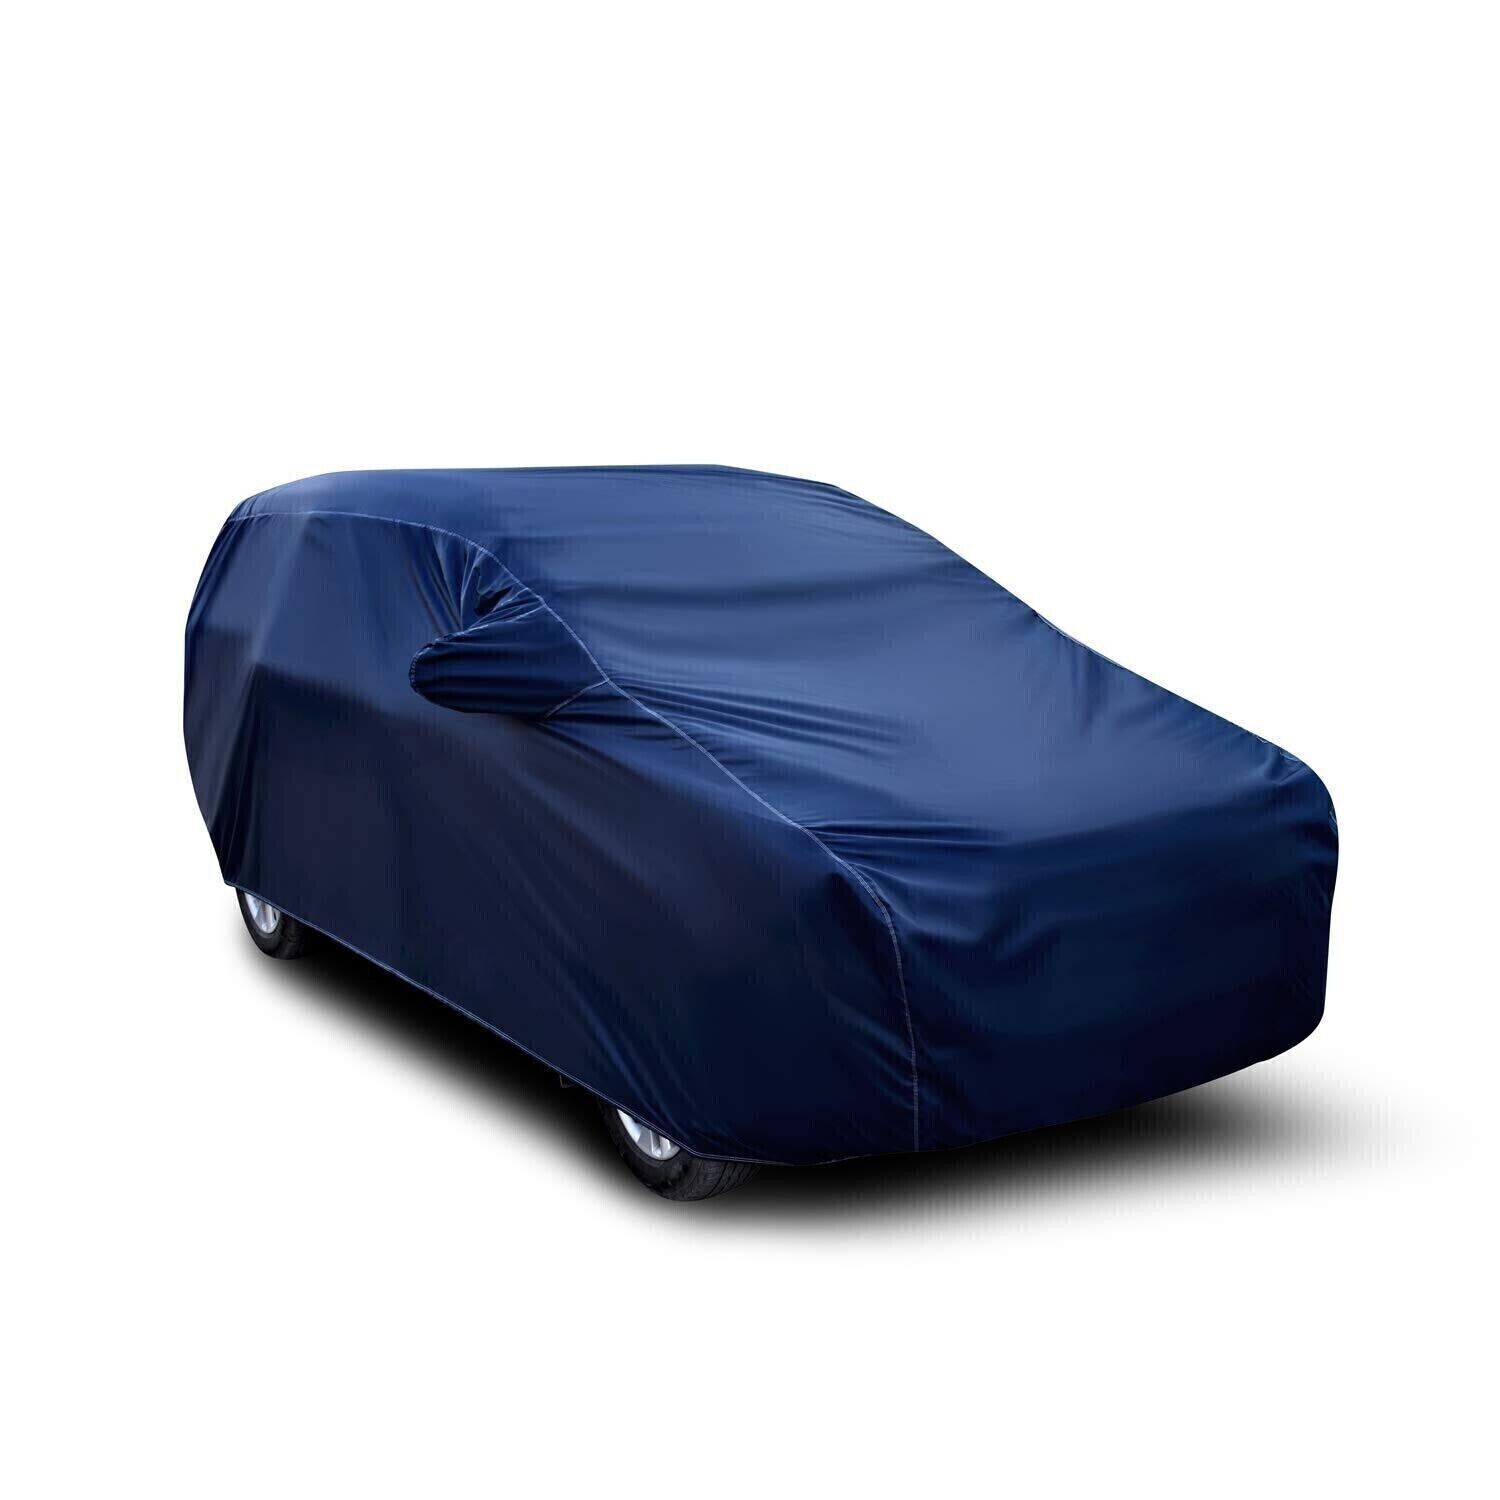 For Suzuki Samurai Willys MB Ford Dust Proof Water Resistant Body Cover Blue